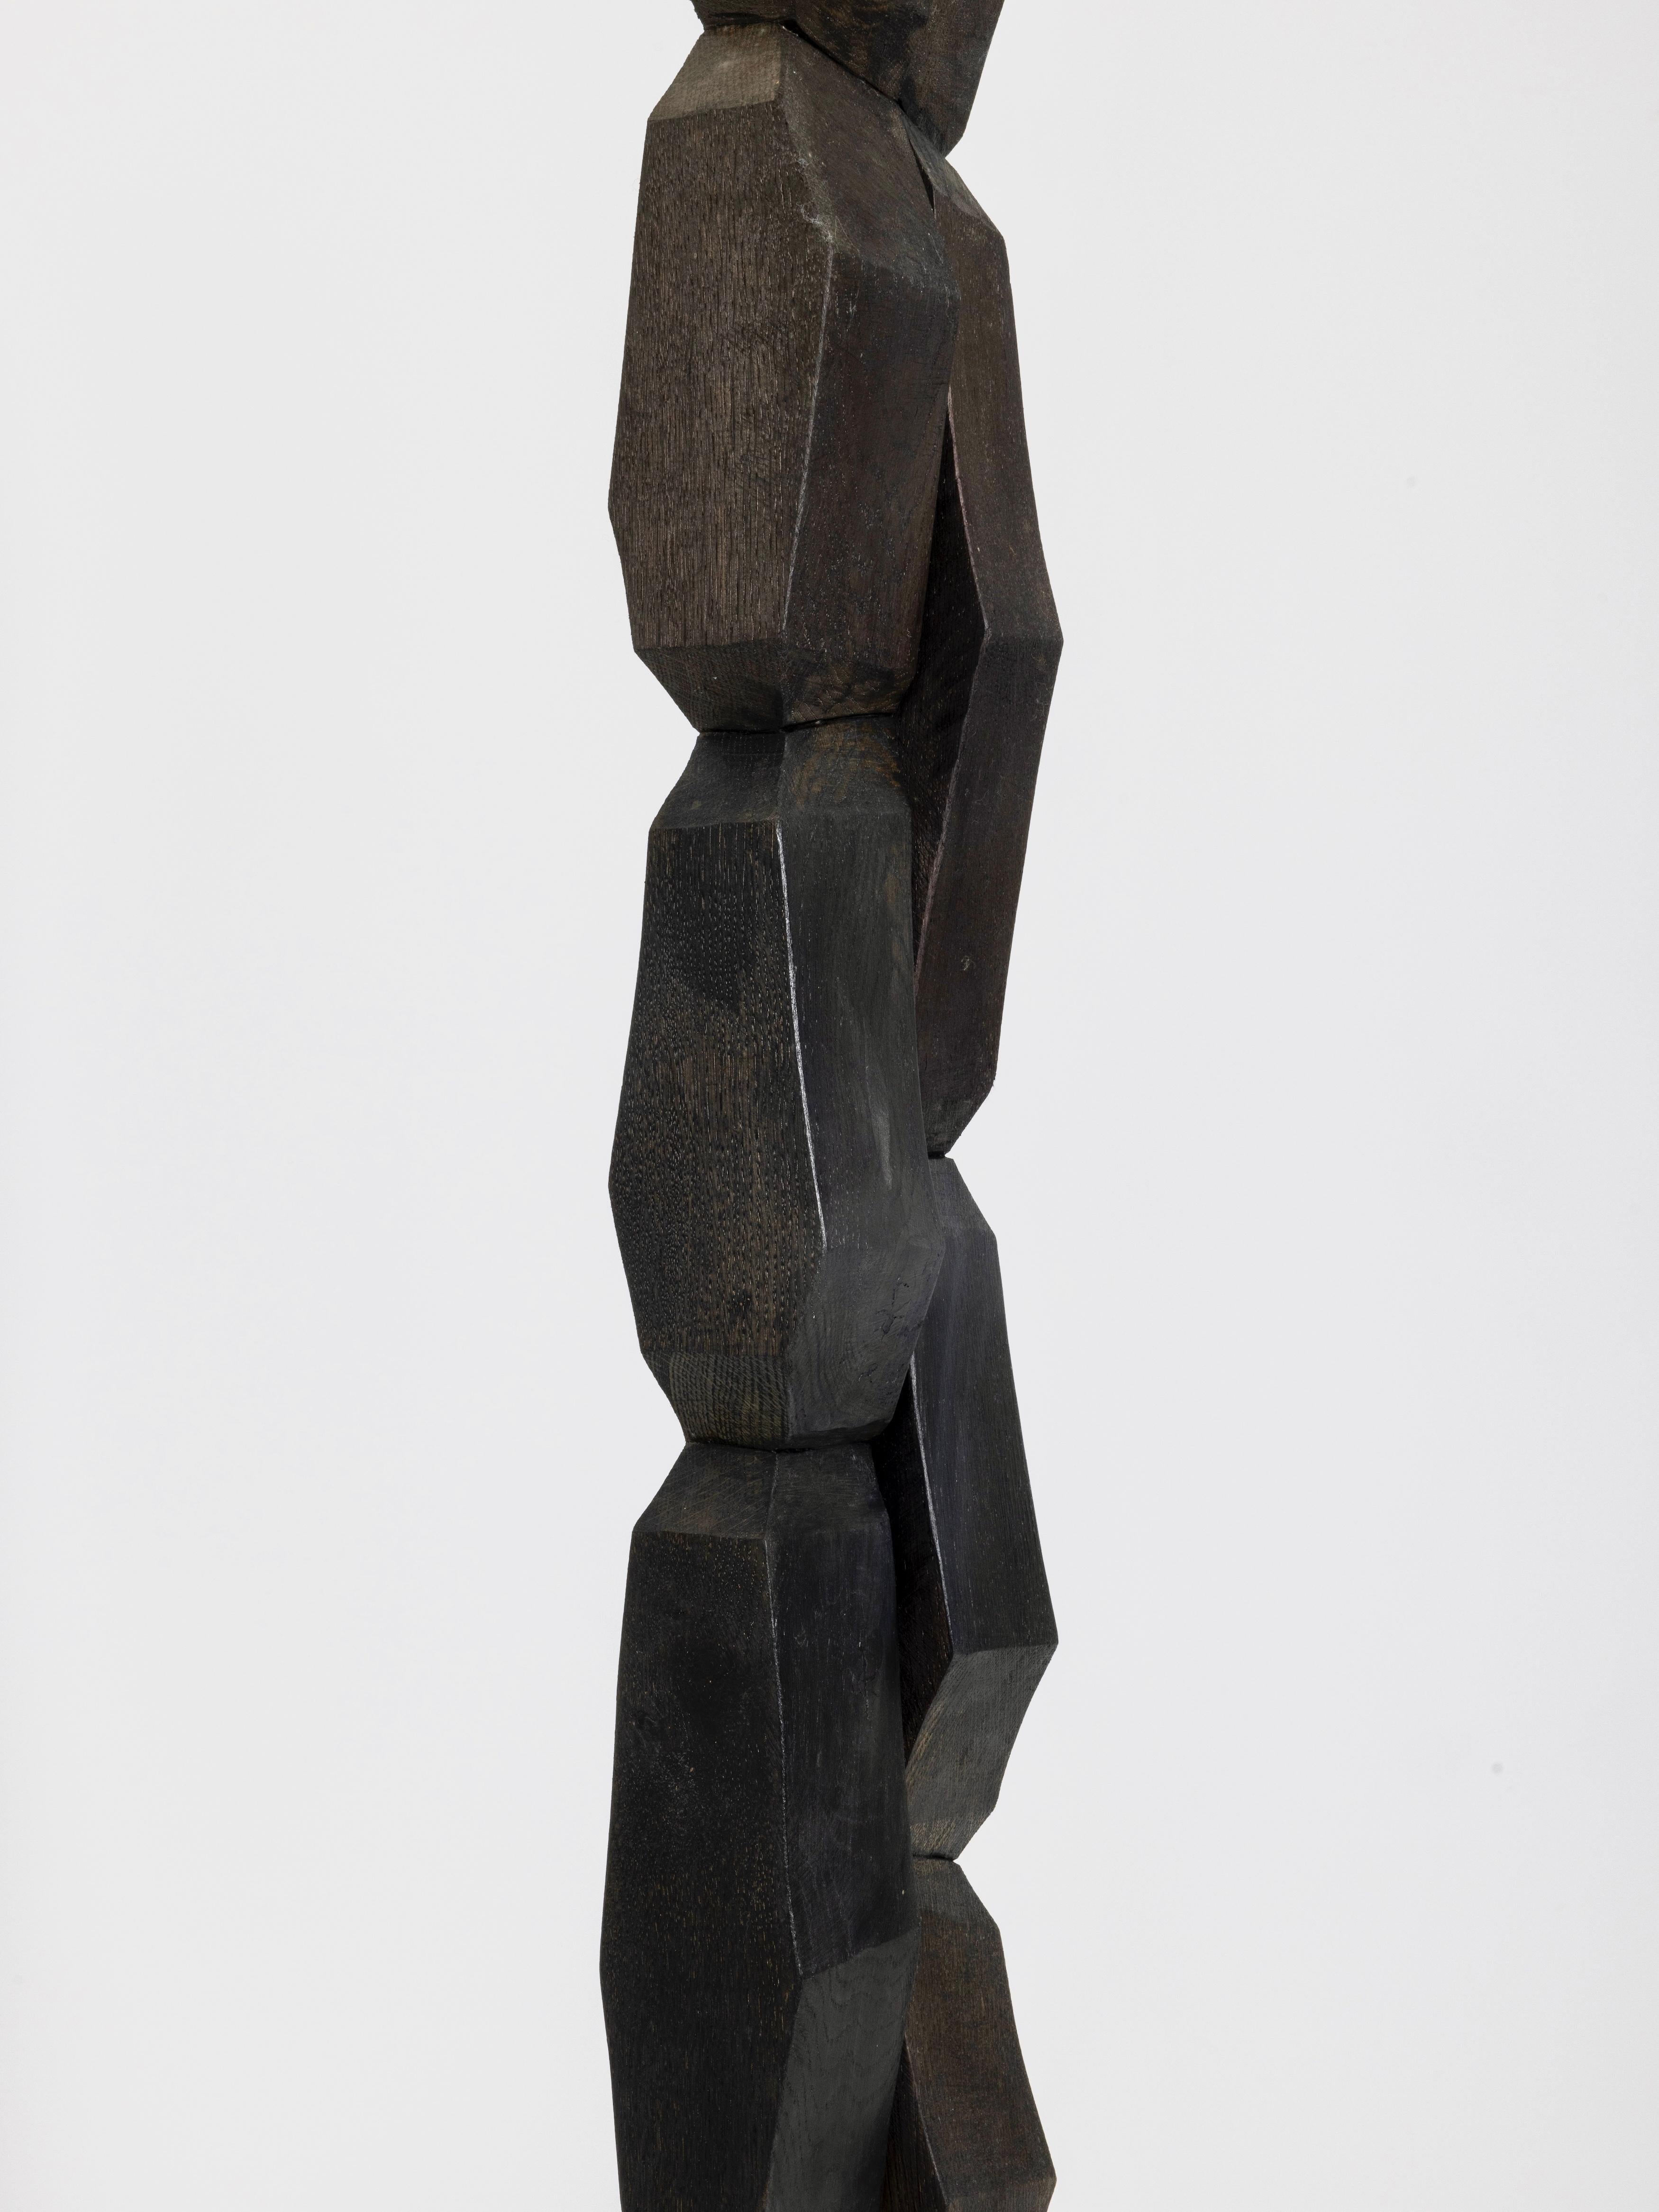 Contemporary Wooden Totem Sculpture by Bertrand Créac'h, France In Excellent Condition For Sale In London, GB